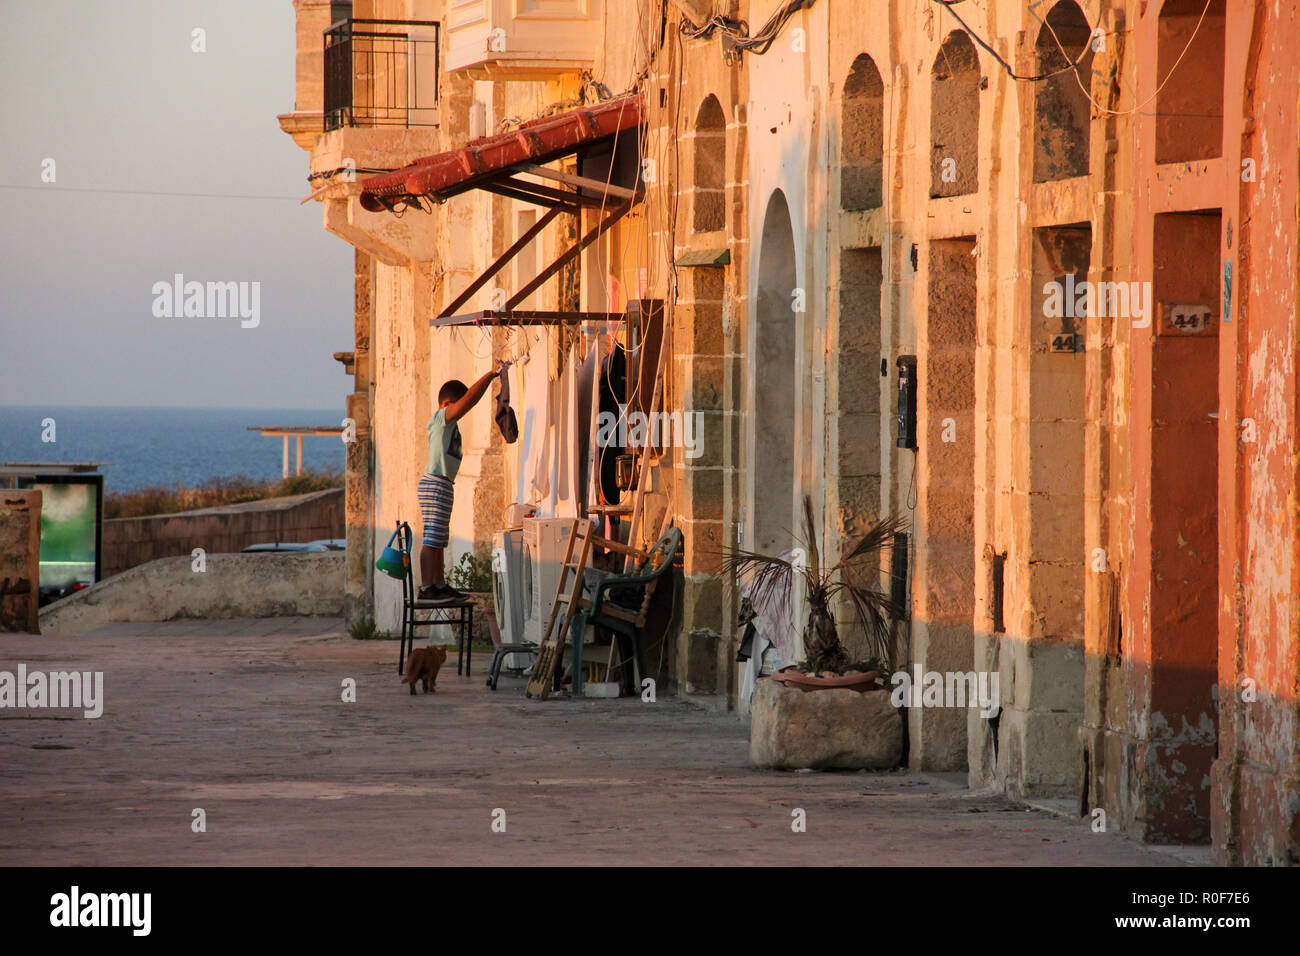 Valletta, Malta - May 2018: Real life on Malta see side during orange sunset - boy hanging clothes drying, two washing machines and gignger cat on the Stock Photo